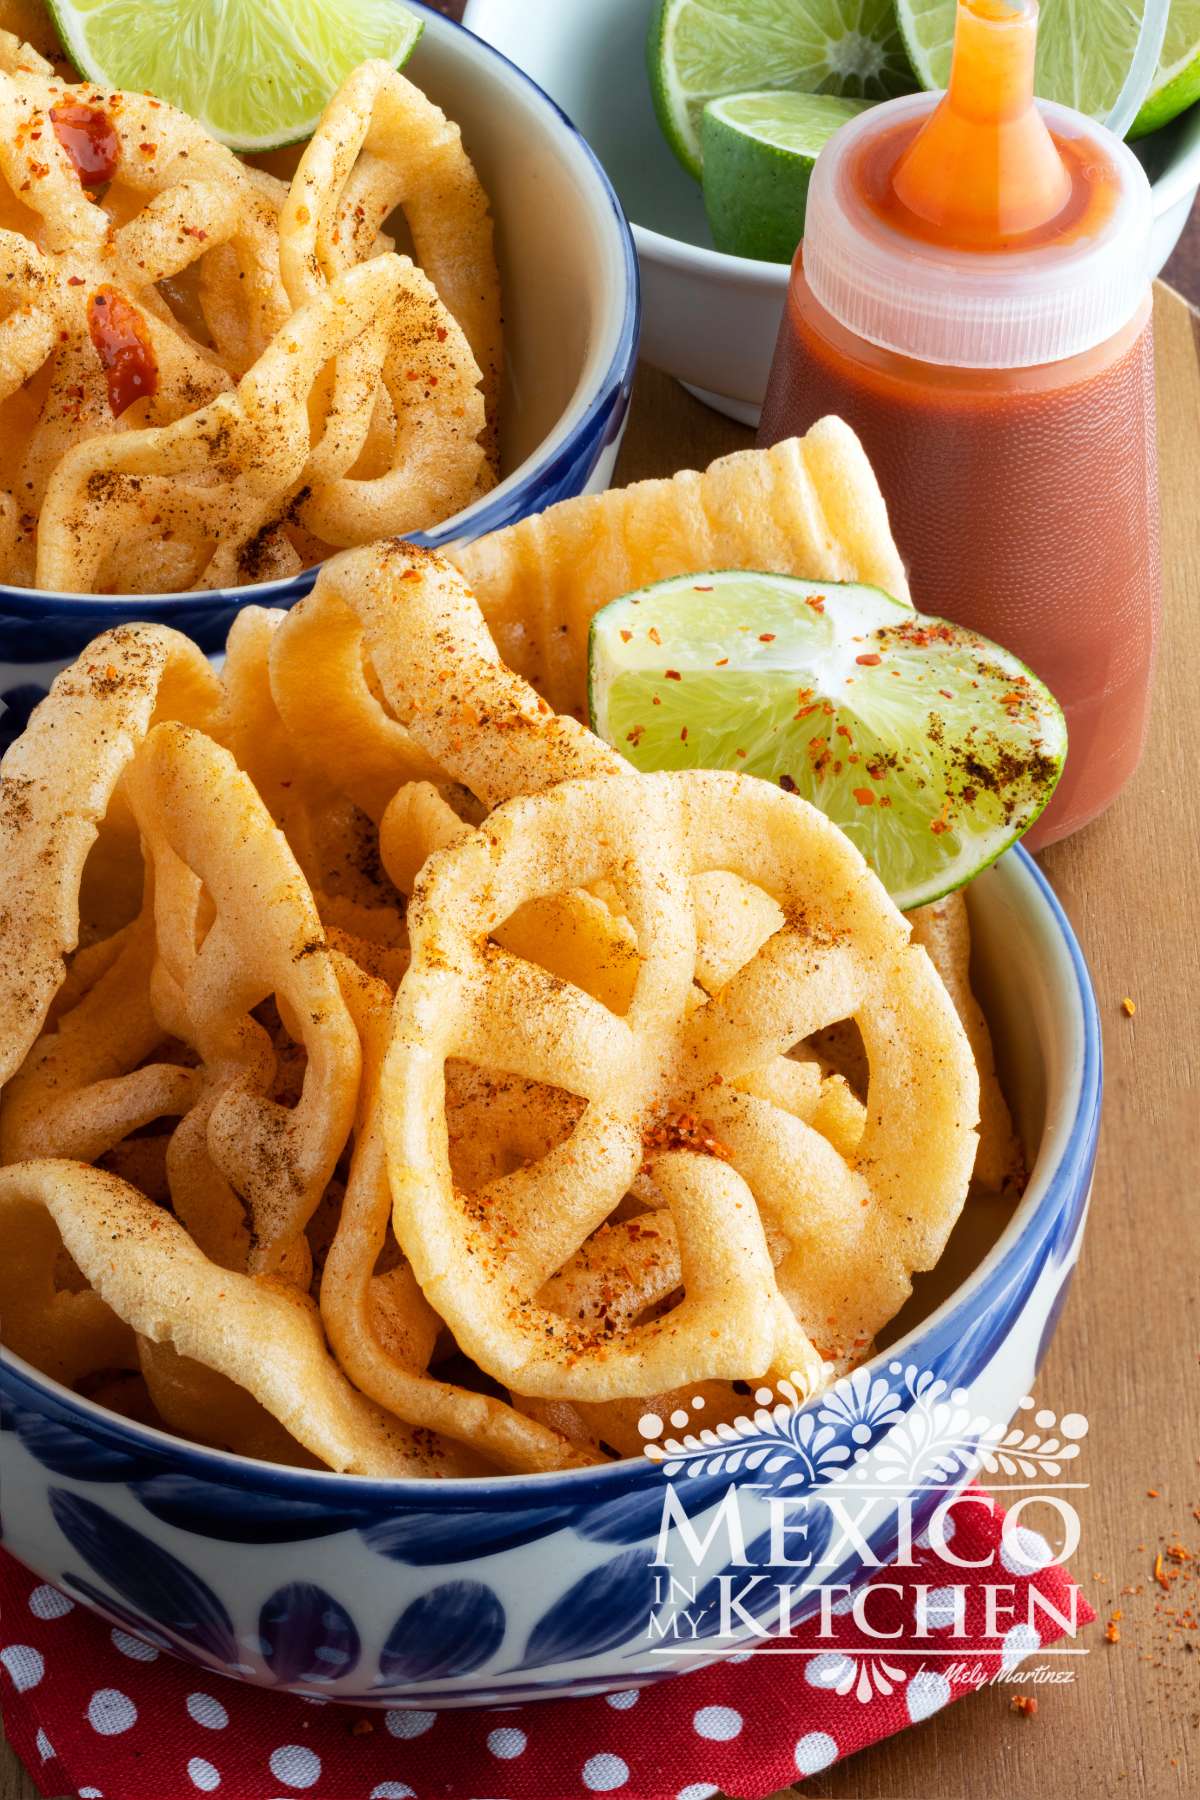 Chicharrones de harina is served in a bowl topped with chili powder and lime.